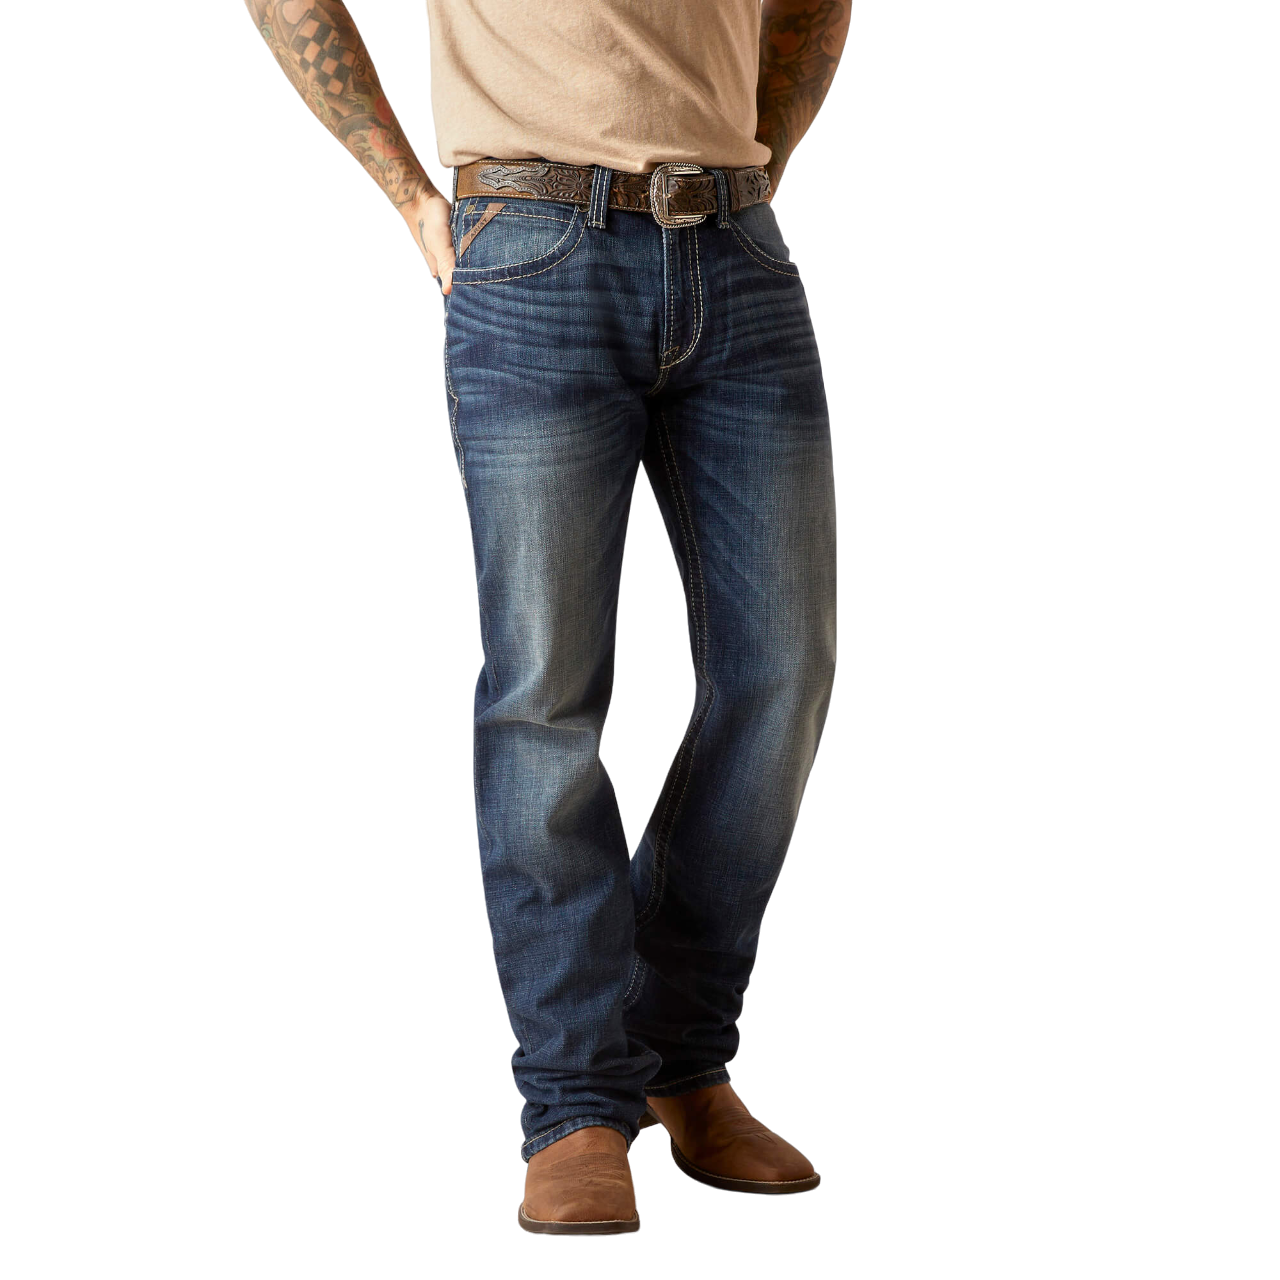 Shop the Ariat Men's Bixby M4 Boot Cut Jean - Style and Durability